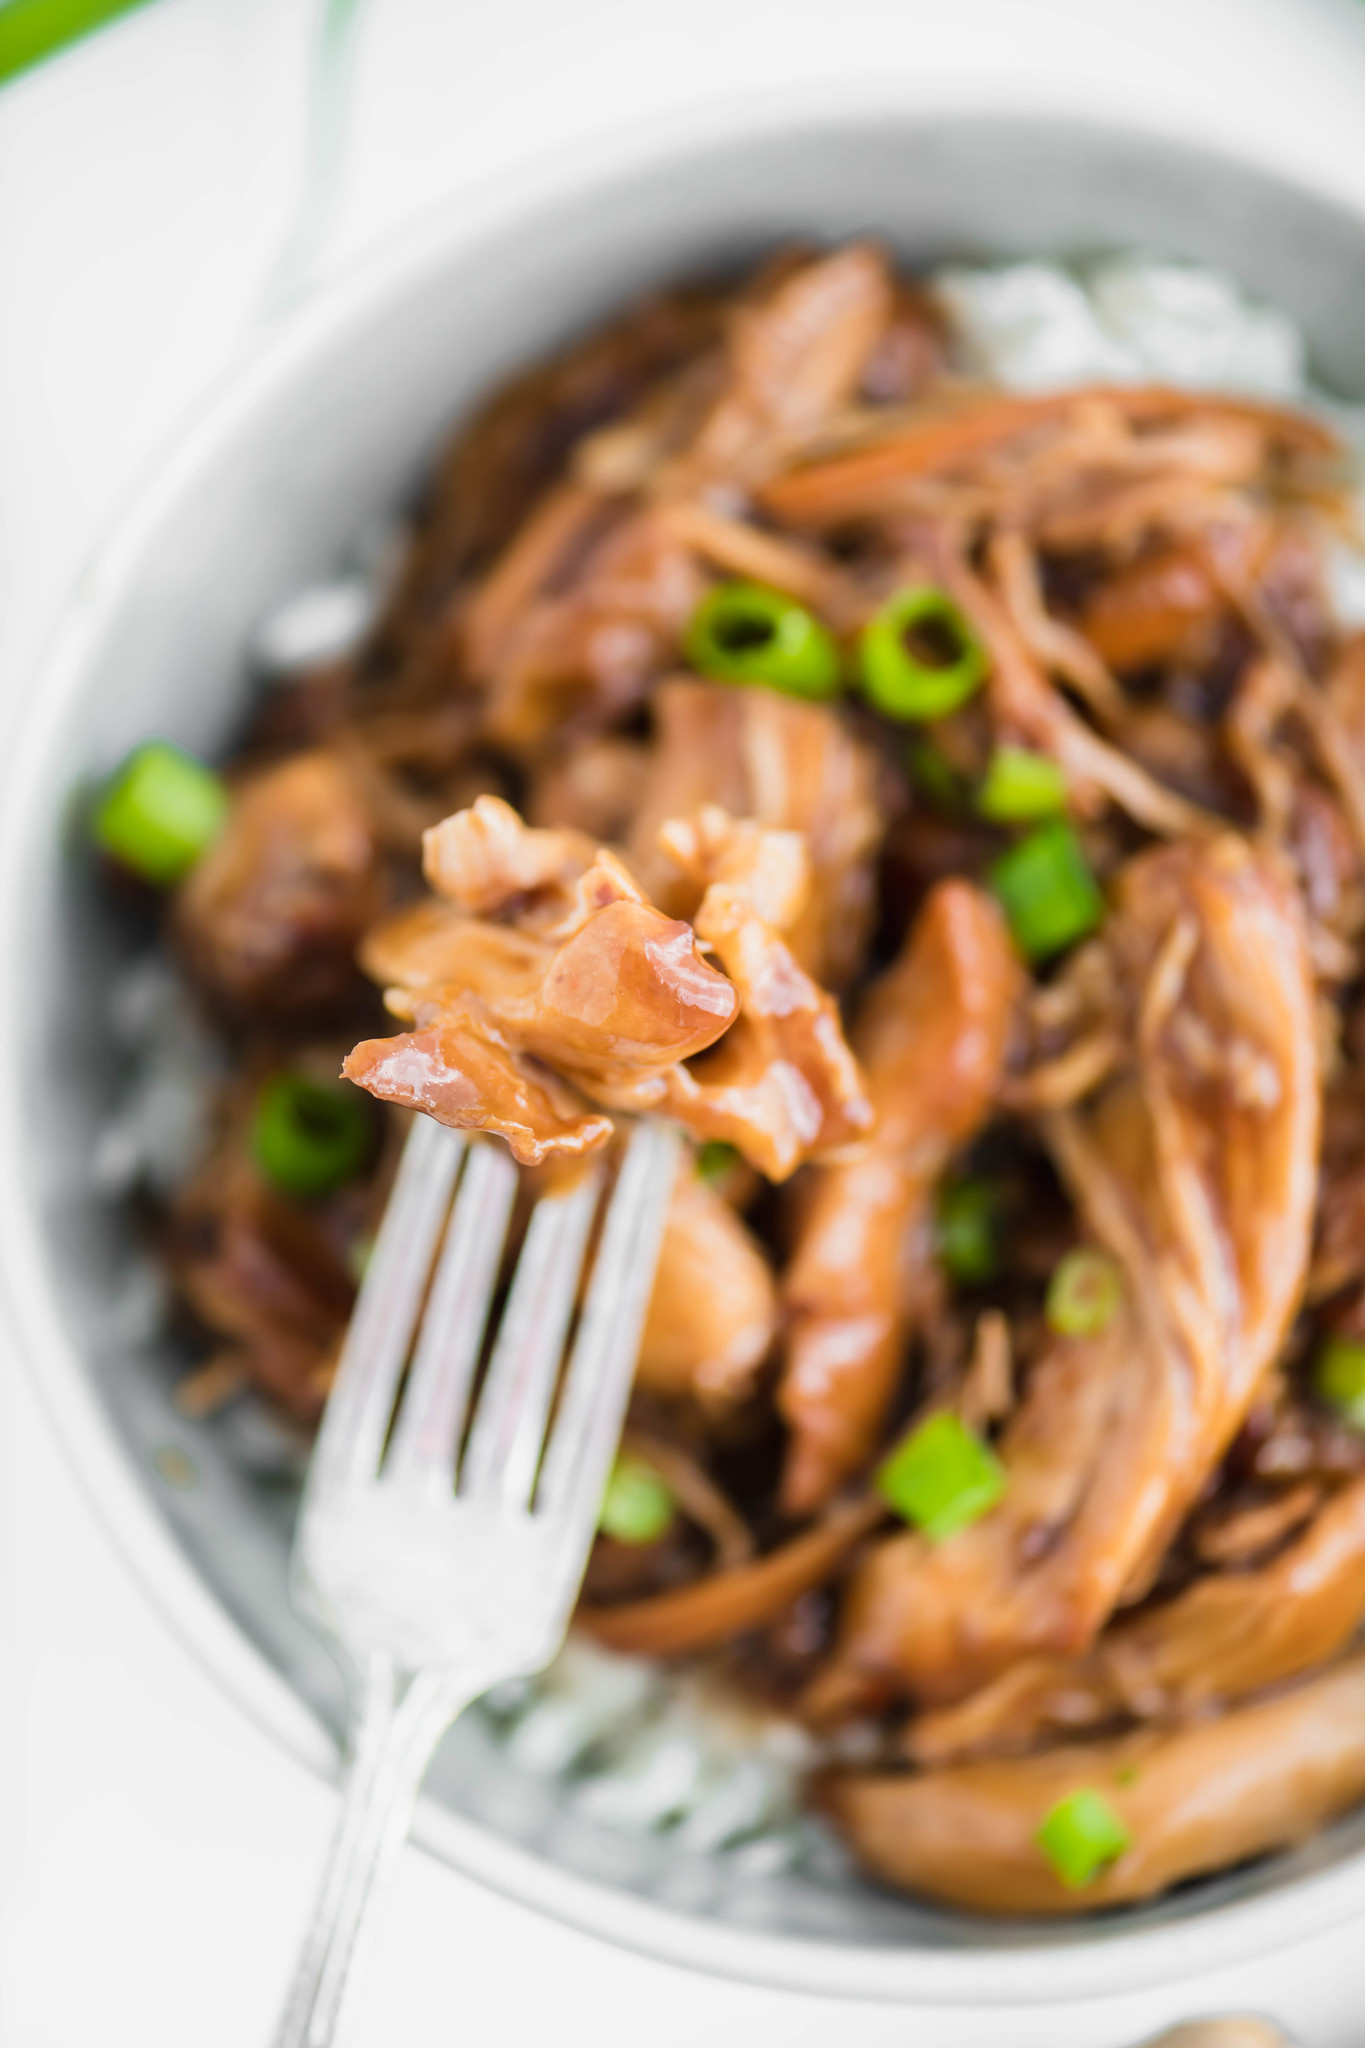 Slow Cooker Bourbon Chicken is just what your busy weeknights need. Packed full of sweet, sticky, rich flavor.